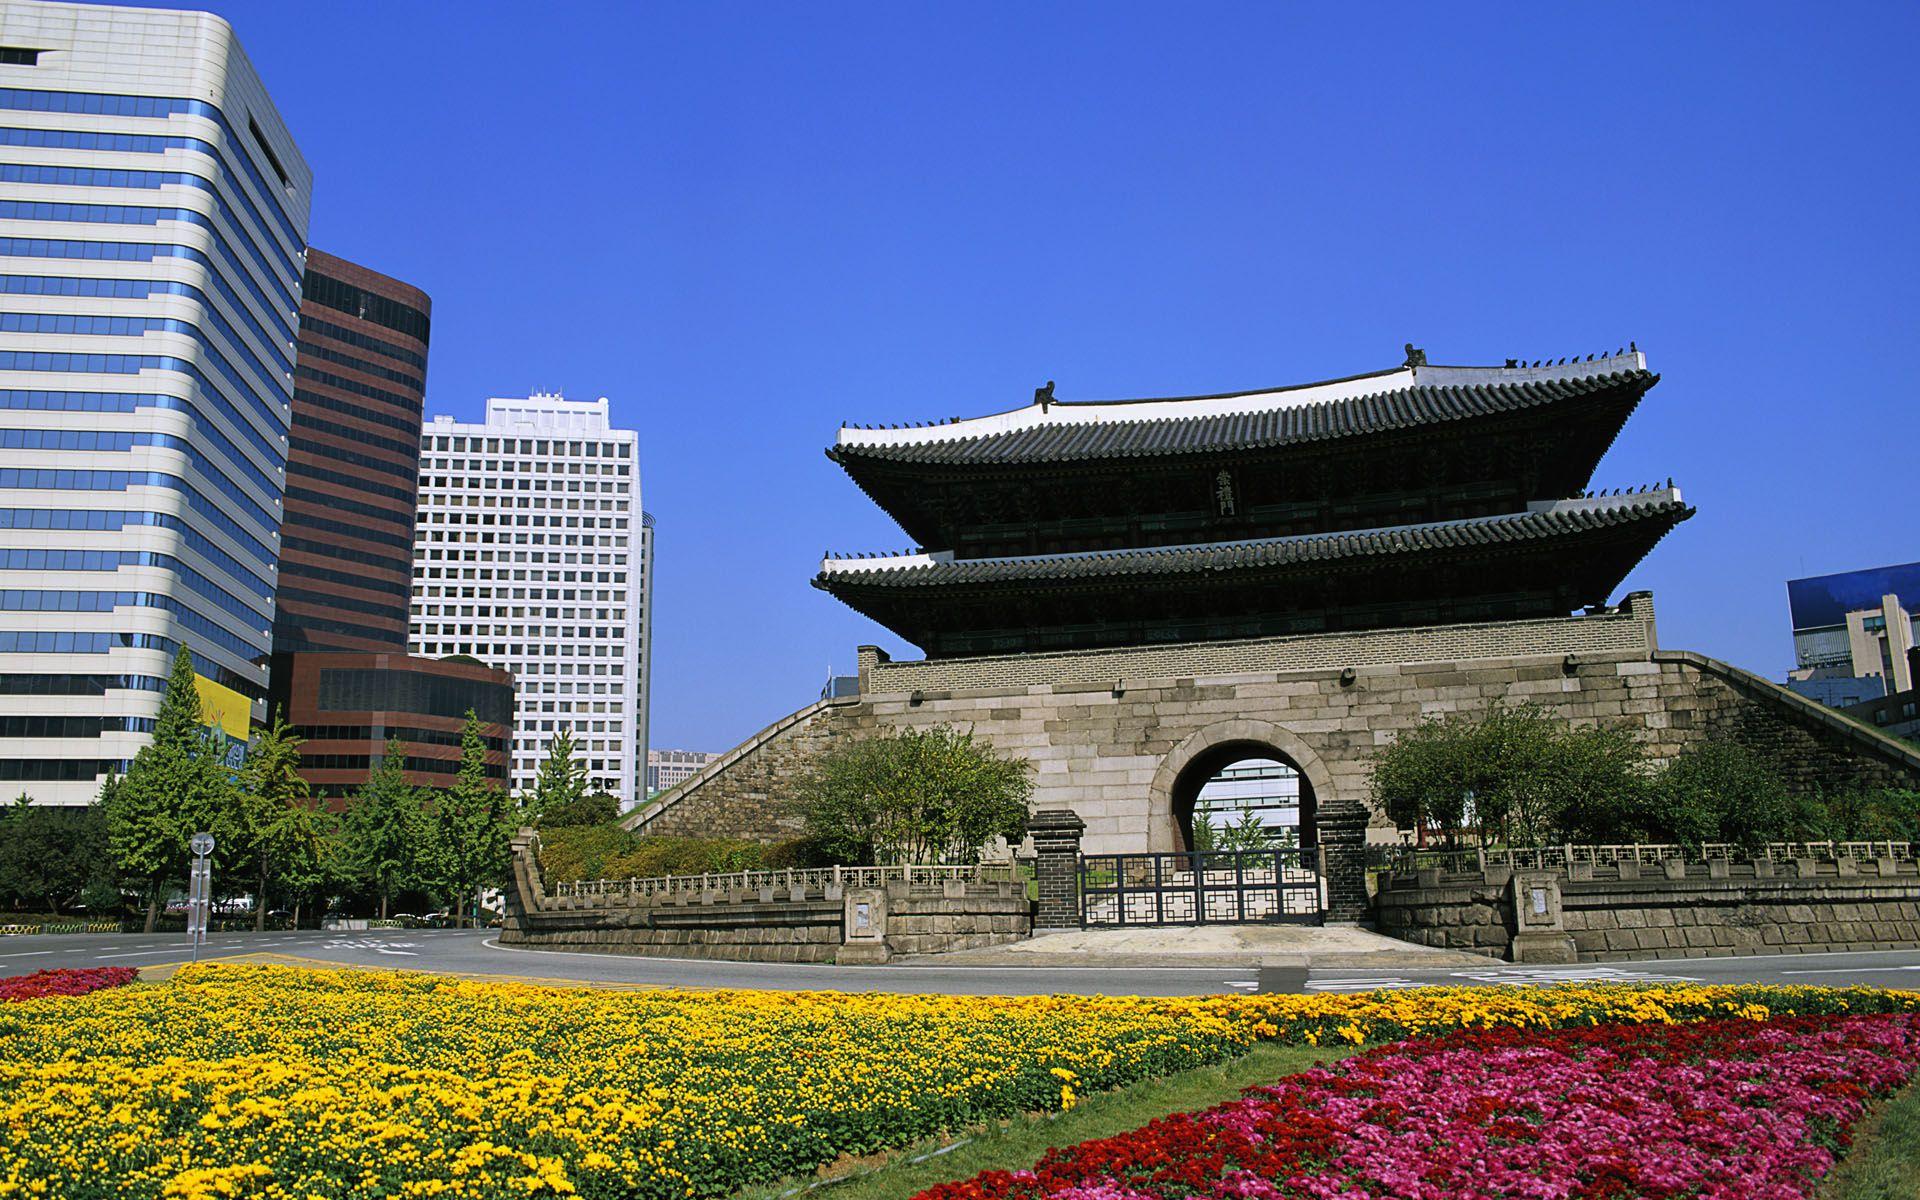 Korean Town wallpaper and image, picture, photo